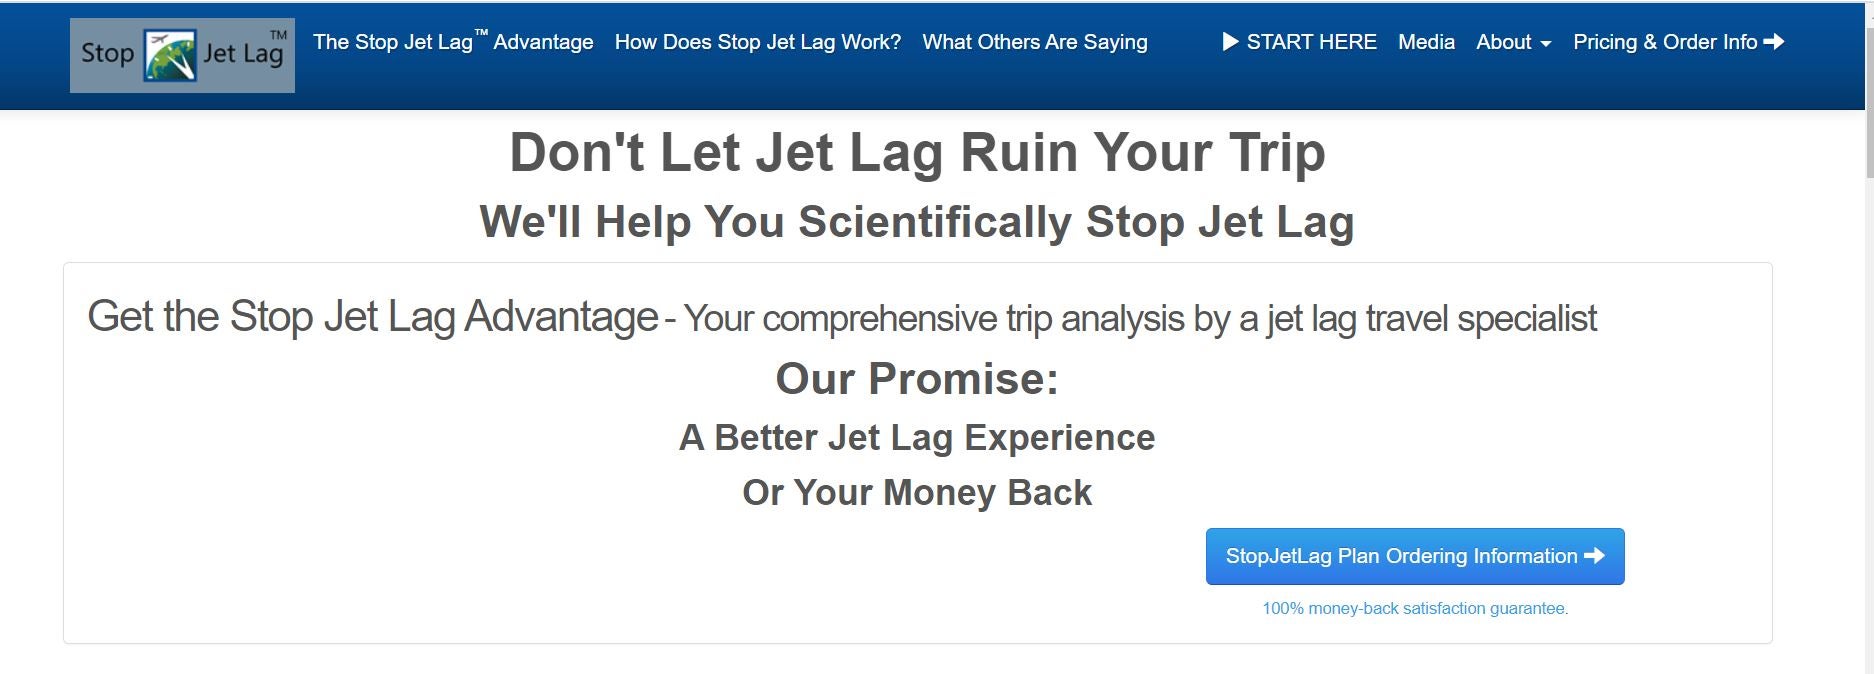 The Science-Based Guide To Beating Jet Lag